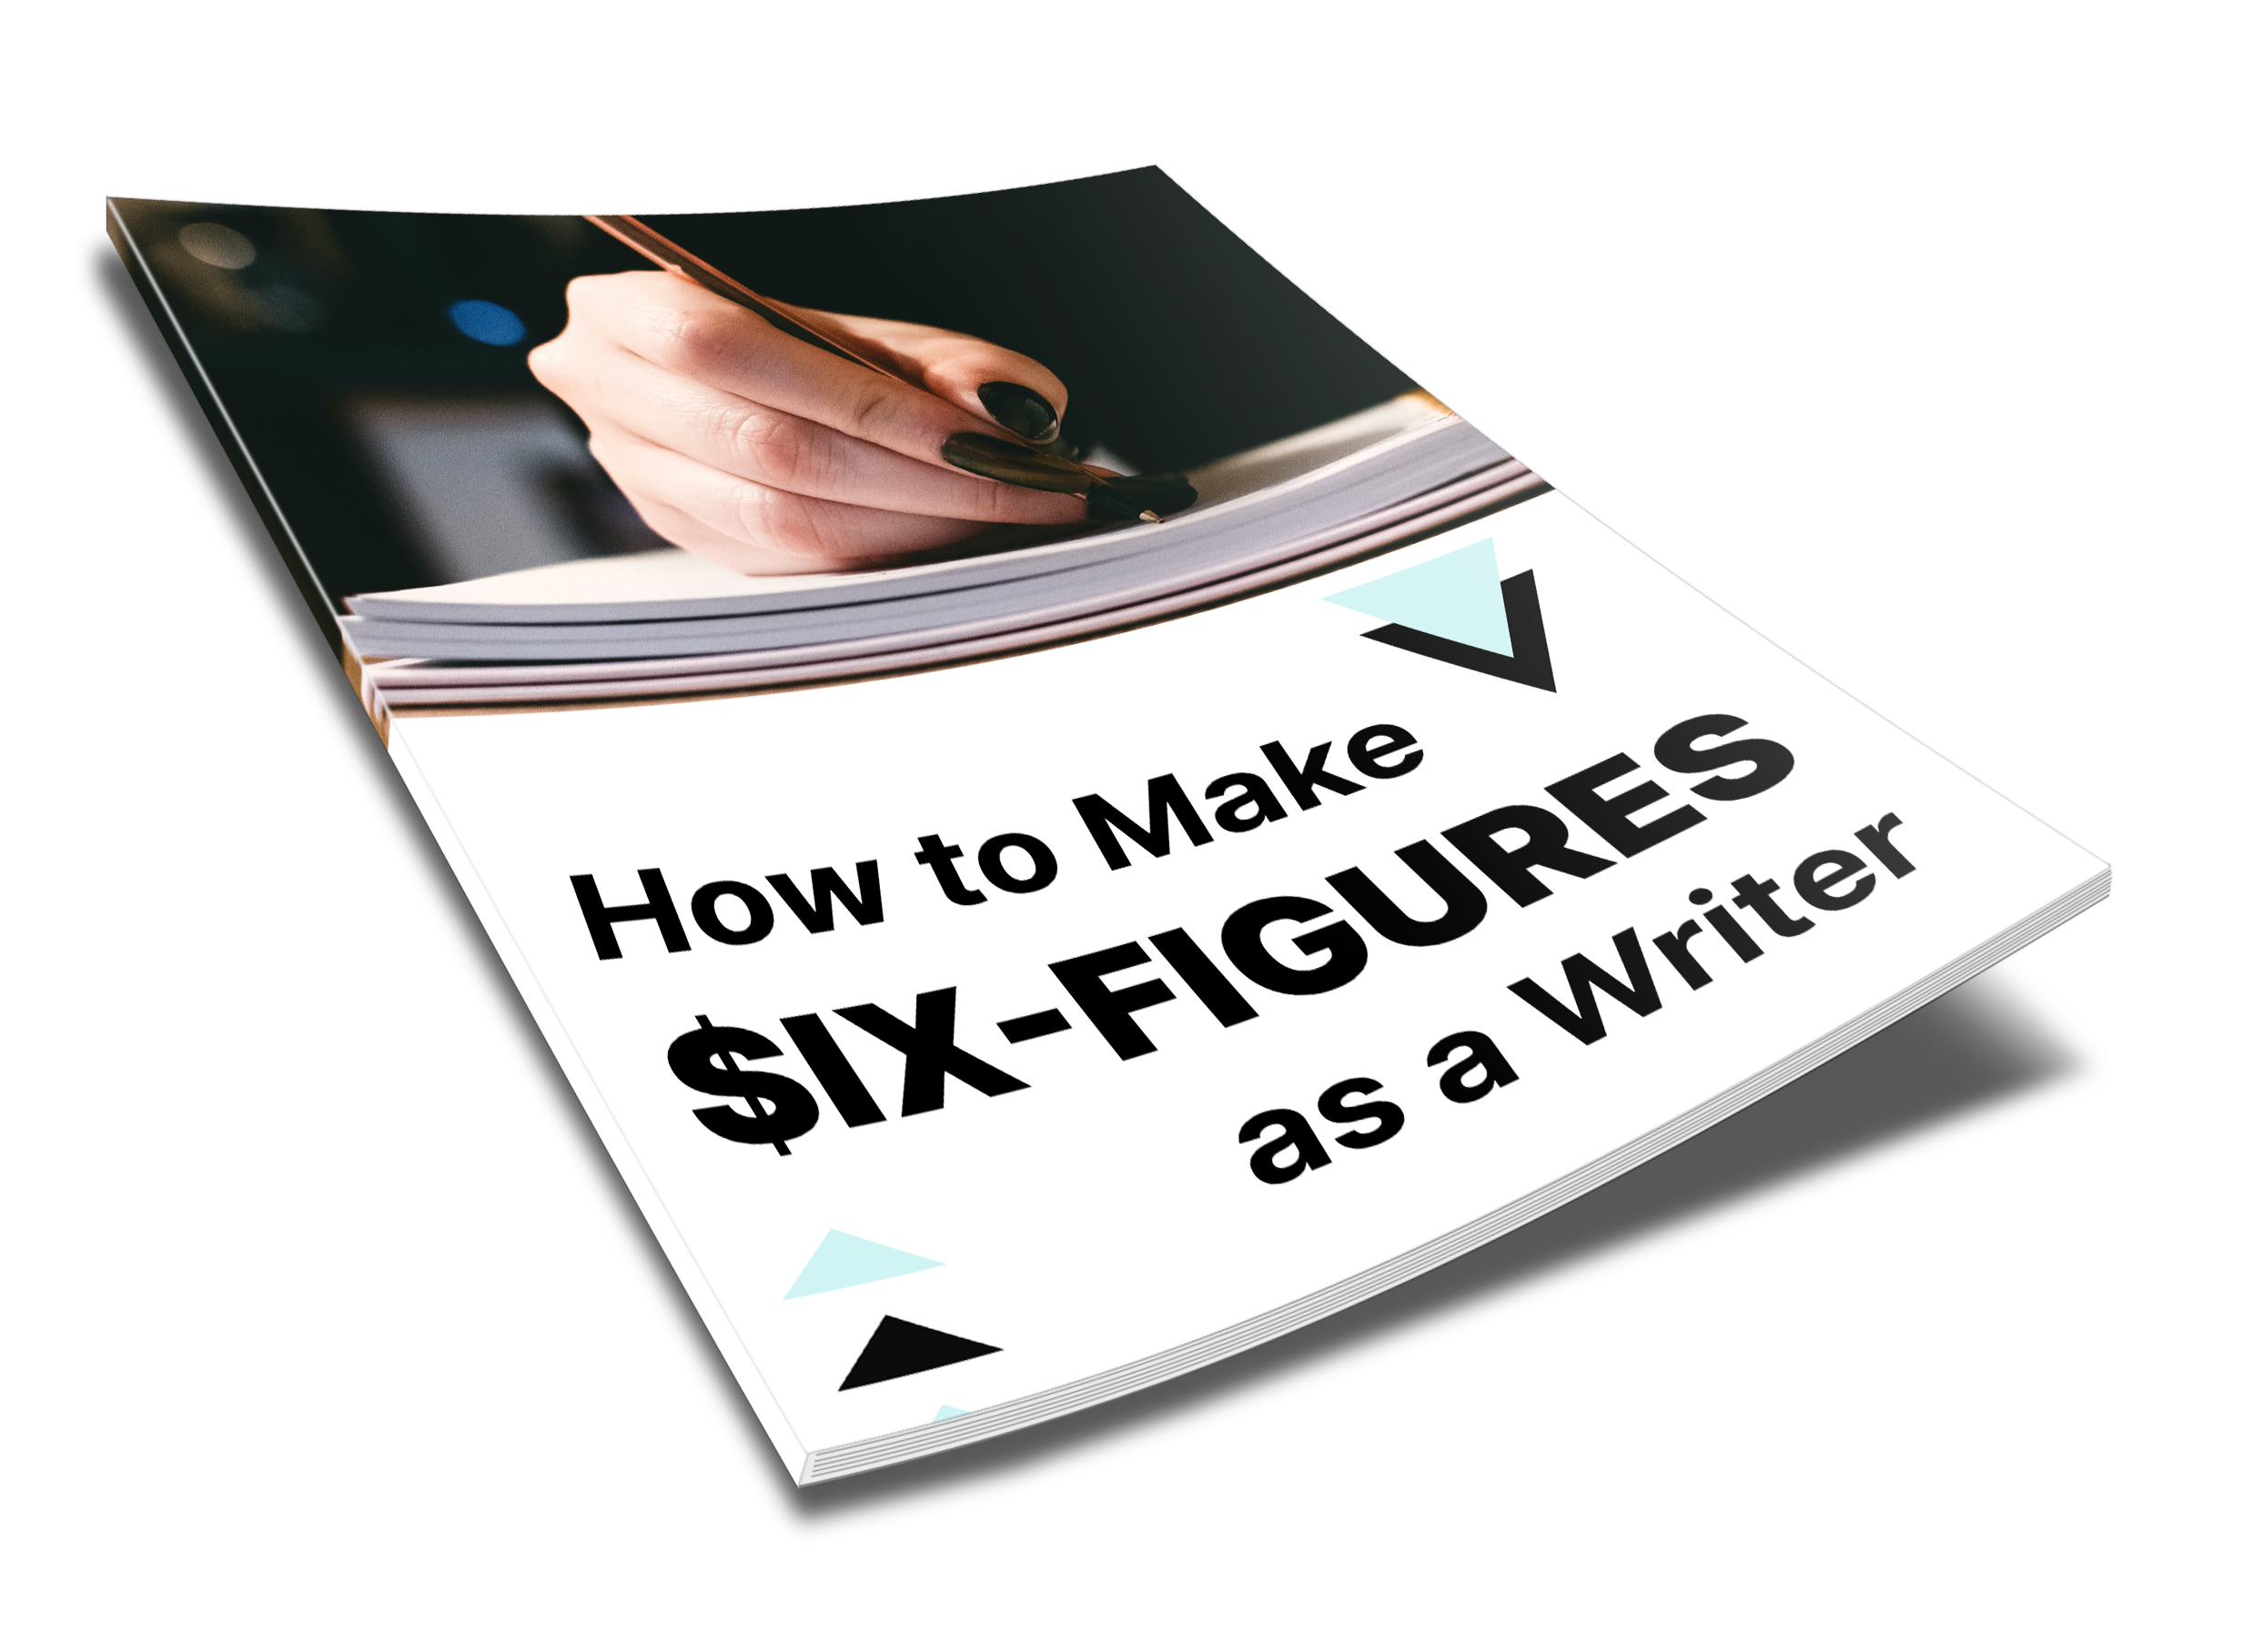 how-to-make-six-figures-as-a-writer